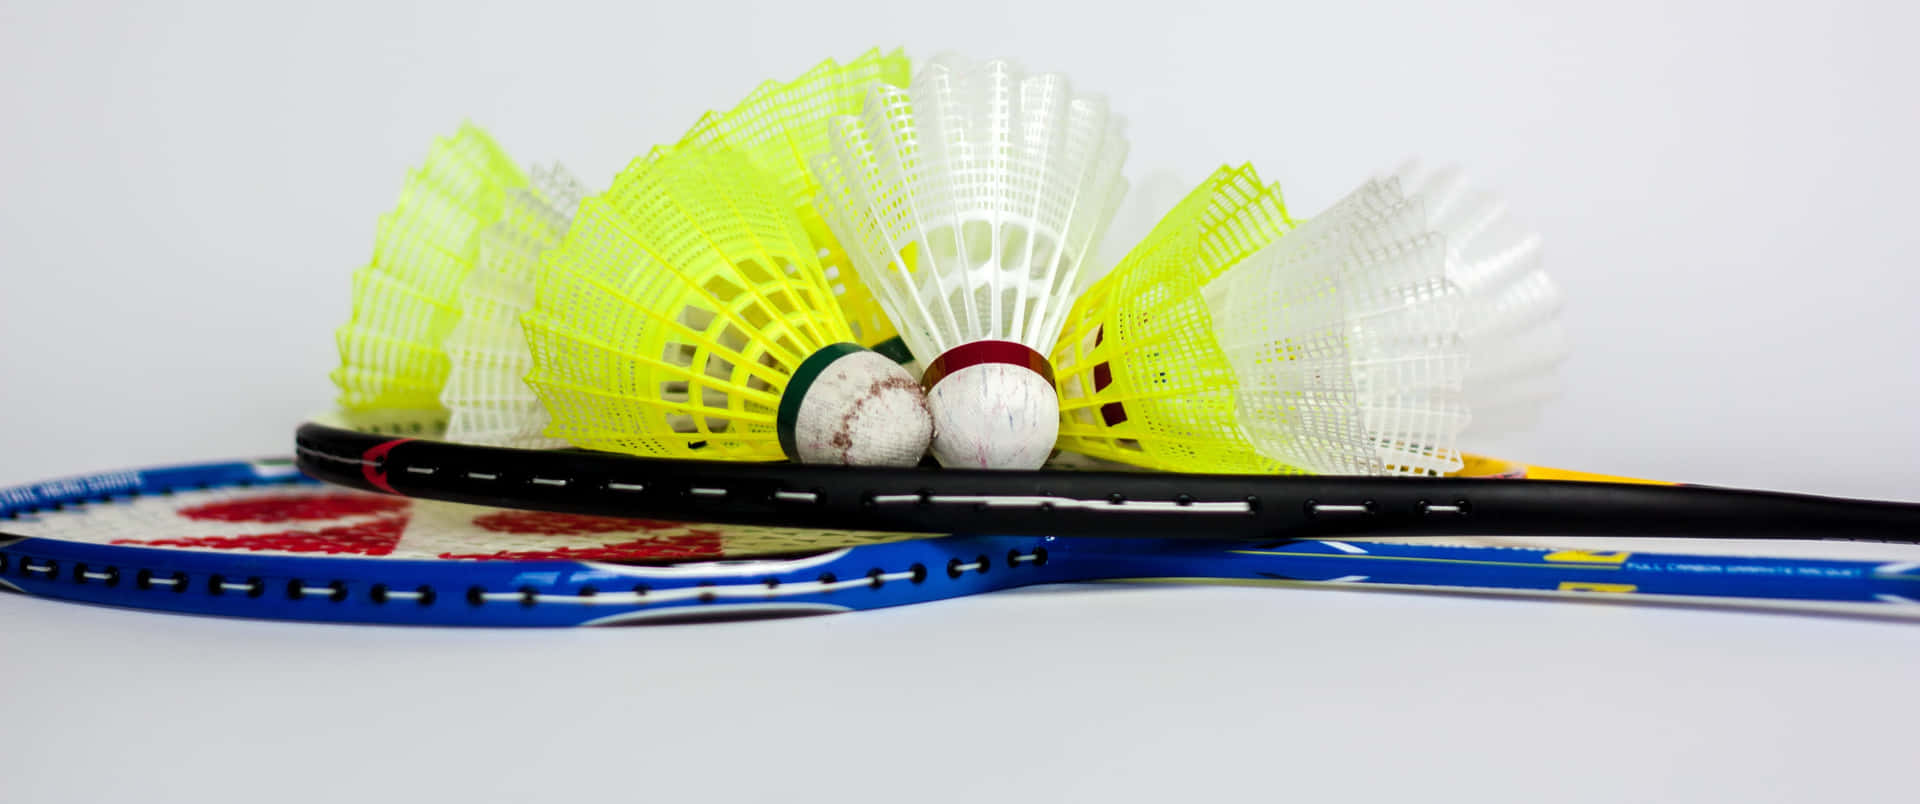 Badminton Rackets And Balls On A White Background